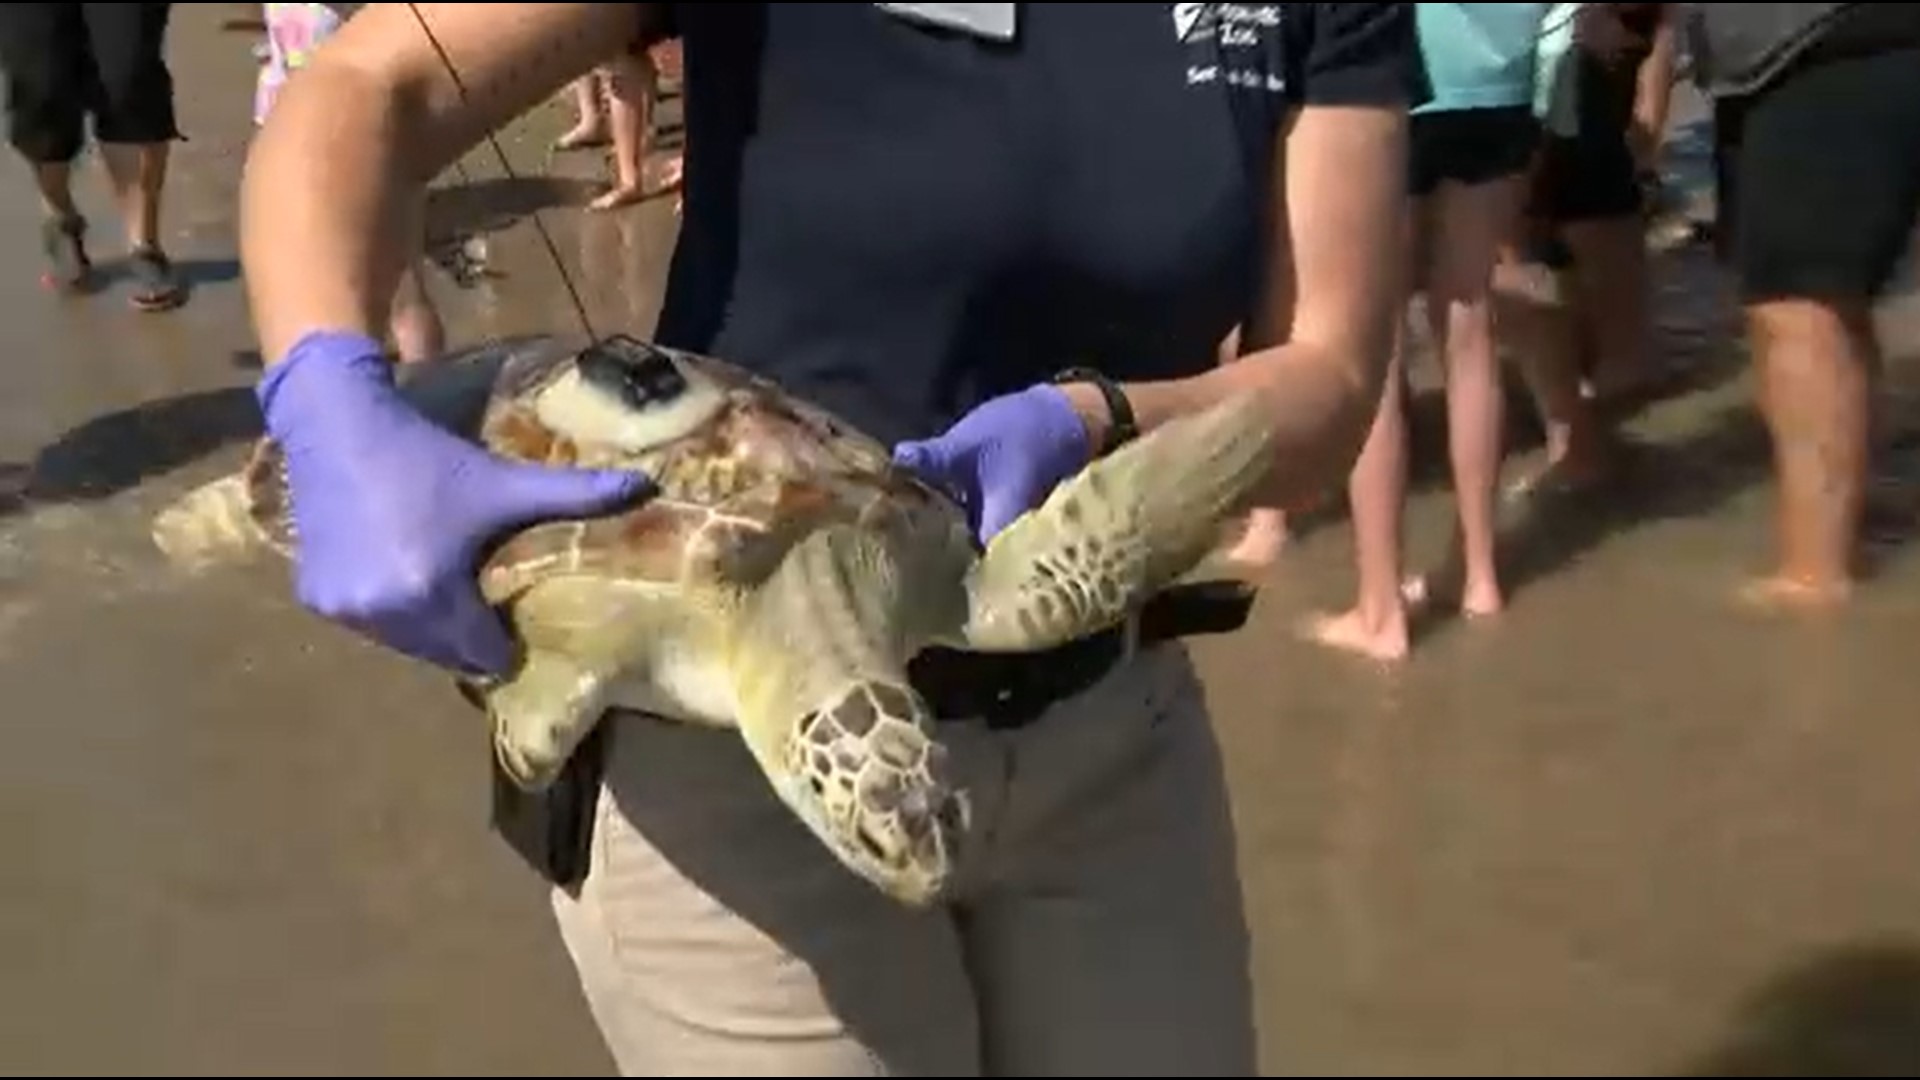 The endangered turtles also showed signs of pneumonia and muscle damage when they were rescued from the icy cold water in January.